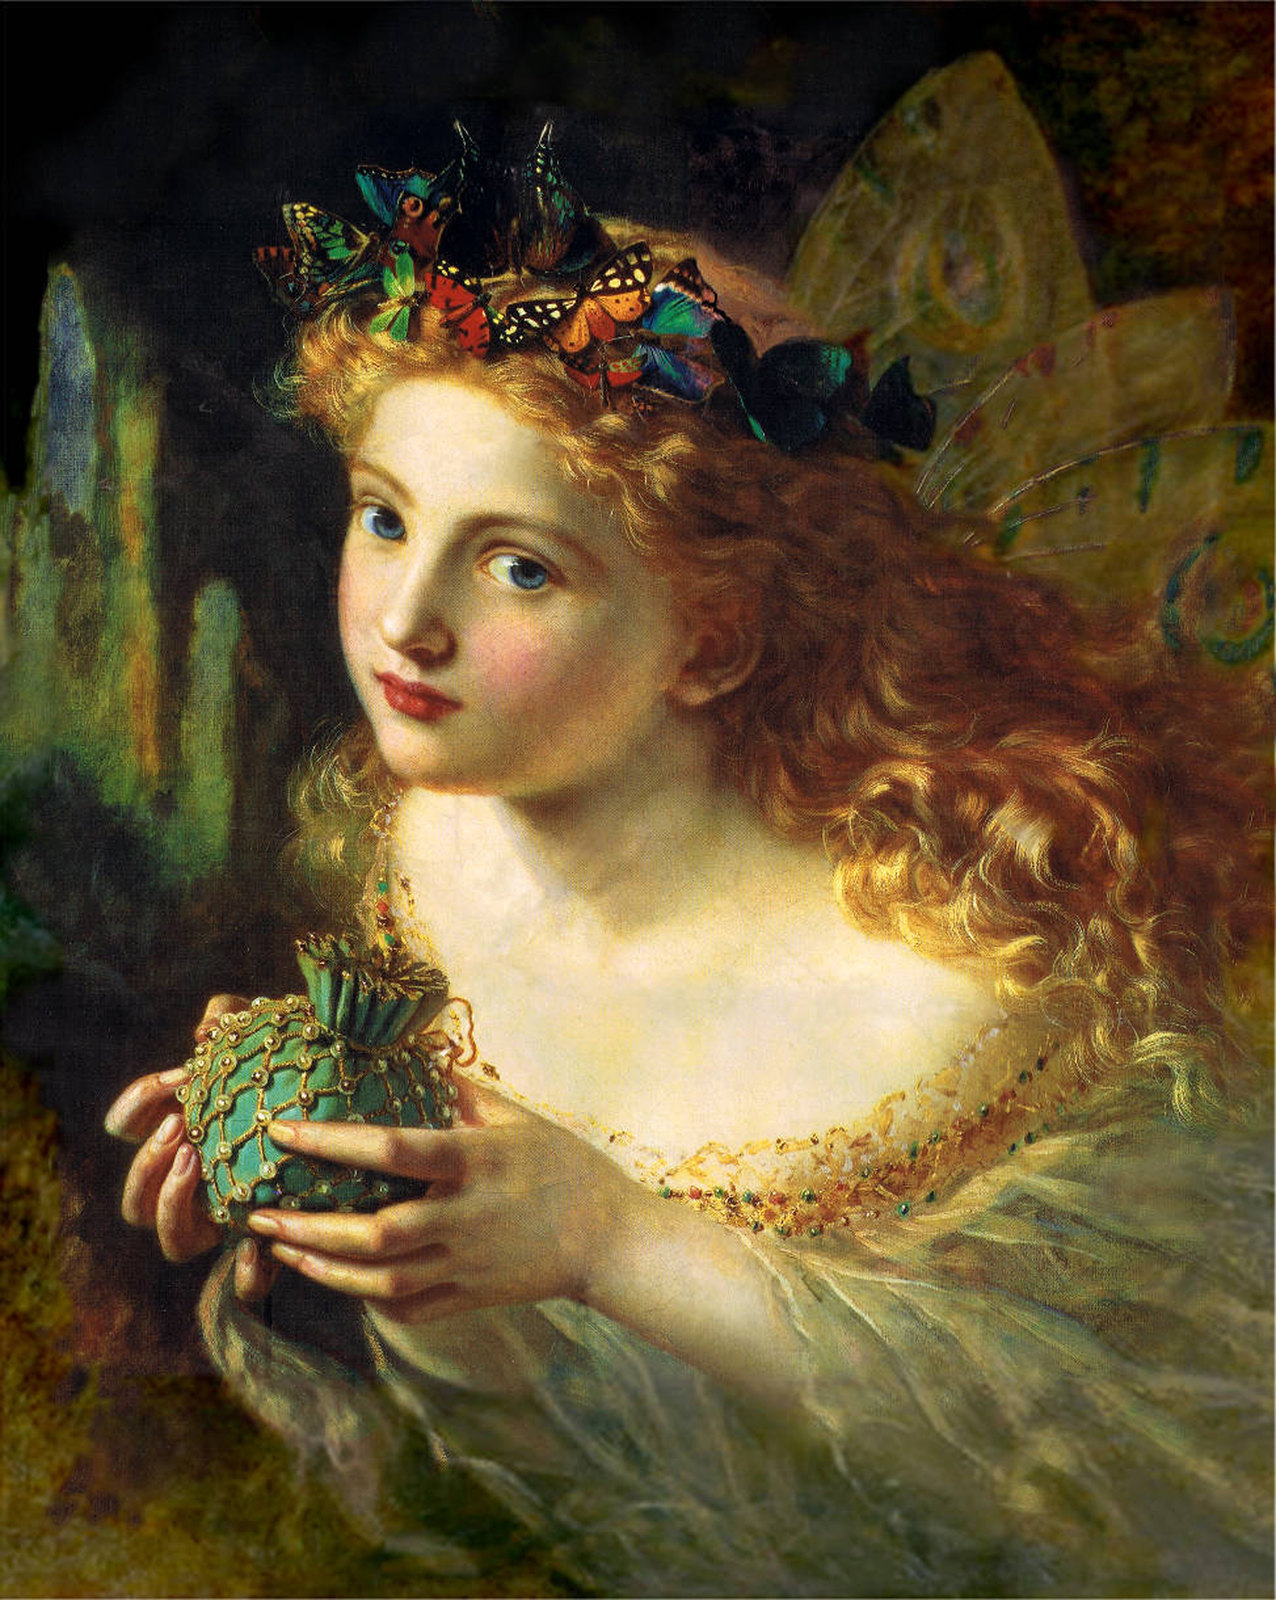 Take the Fair Face of Woman, and Gently Suspending, With Butterflies, Flowers, and Jewels Attending, Thus Your Fairy is Made of Most Beautiful Things by Sophie Gengembre Anderson (1823 - 1903)